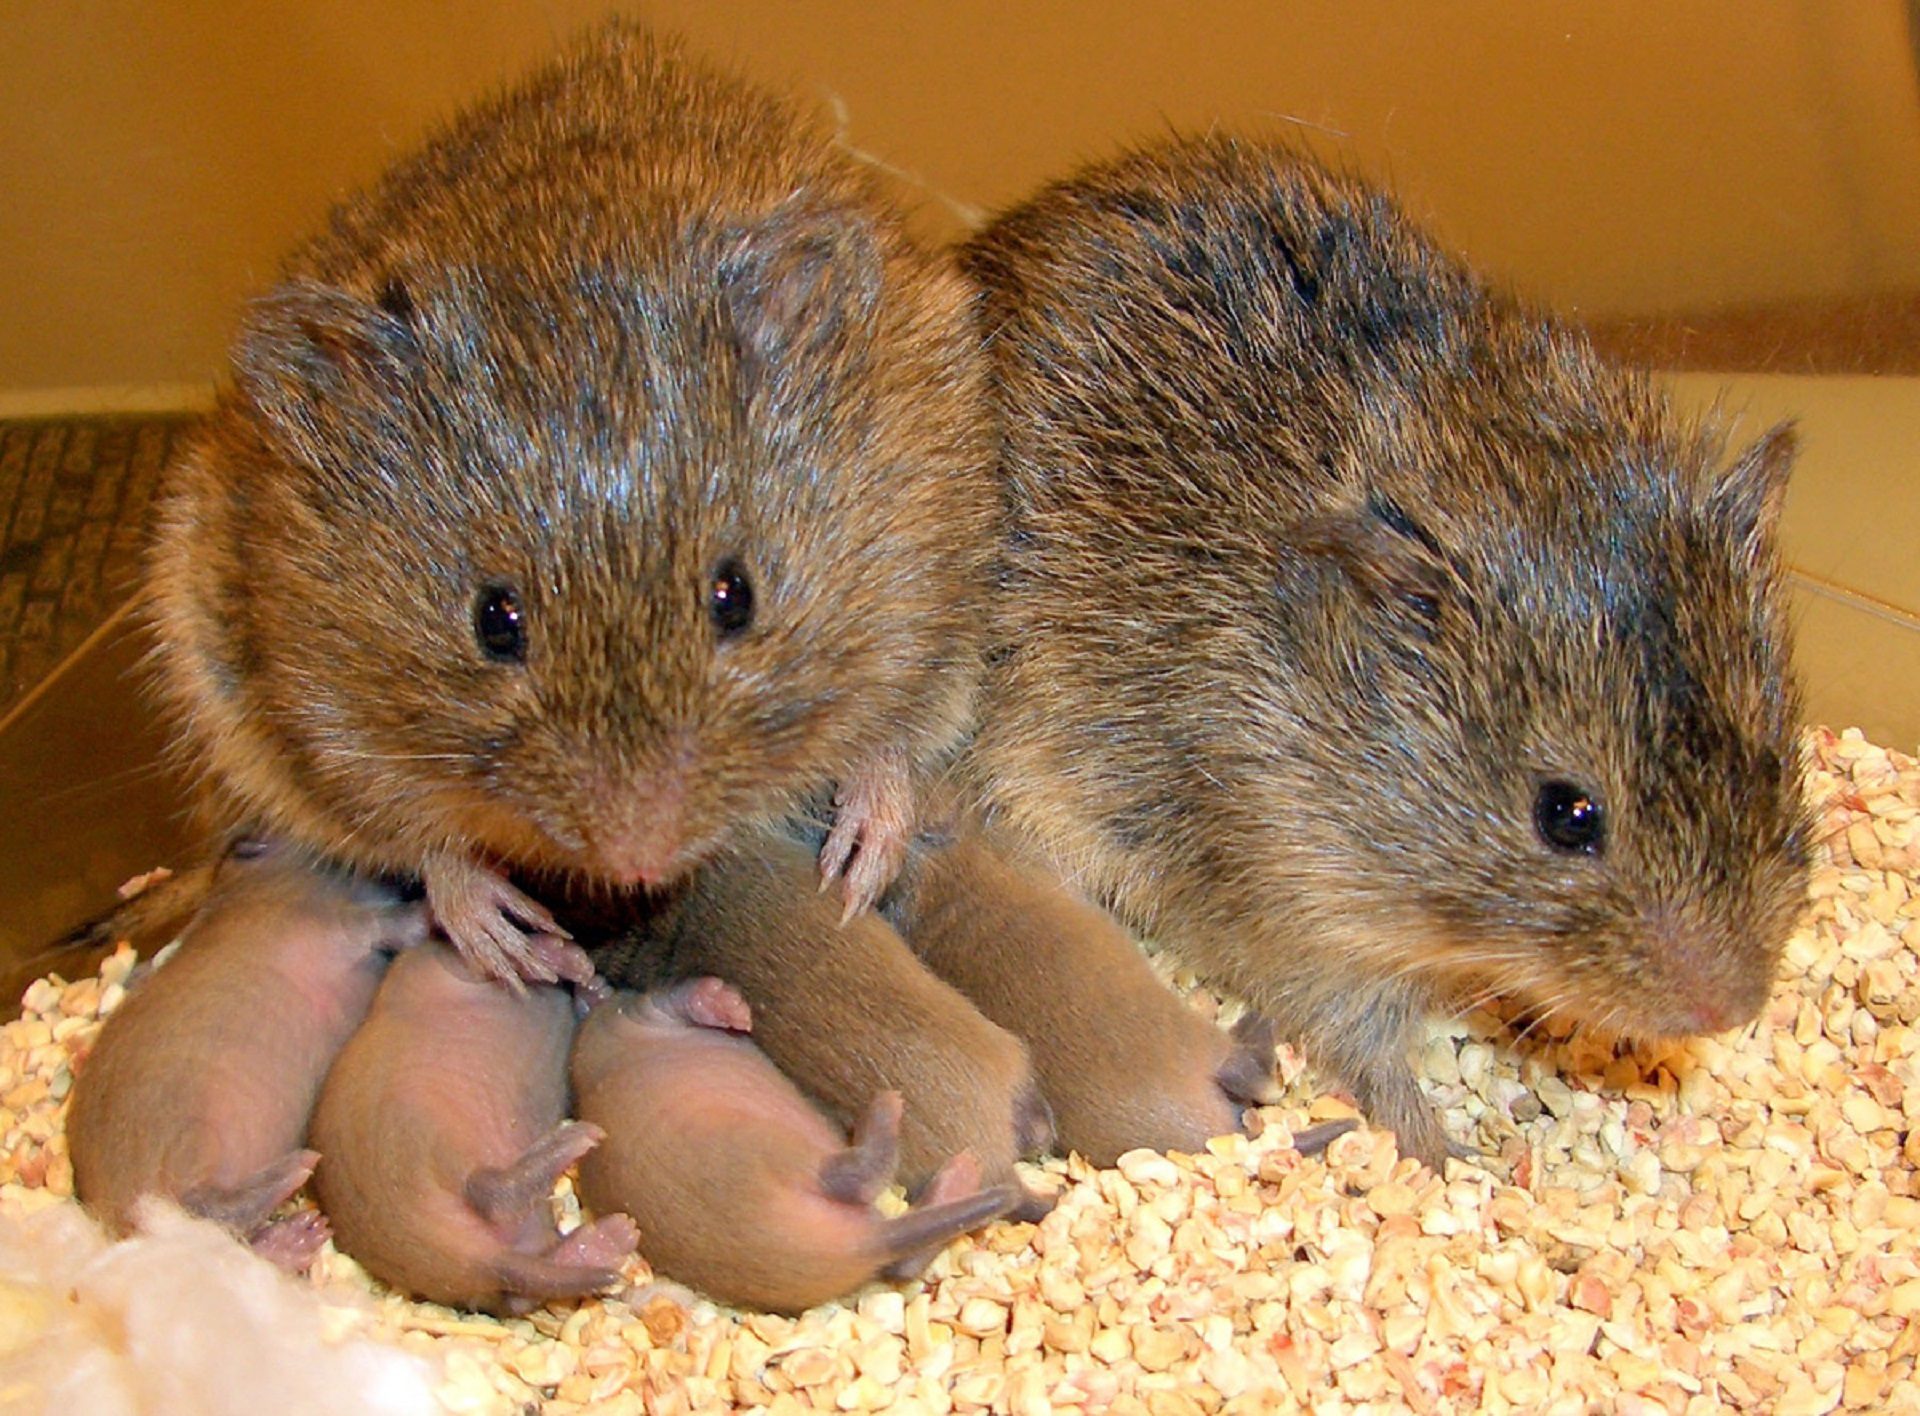 A family of voles.